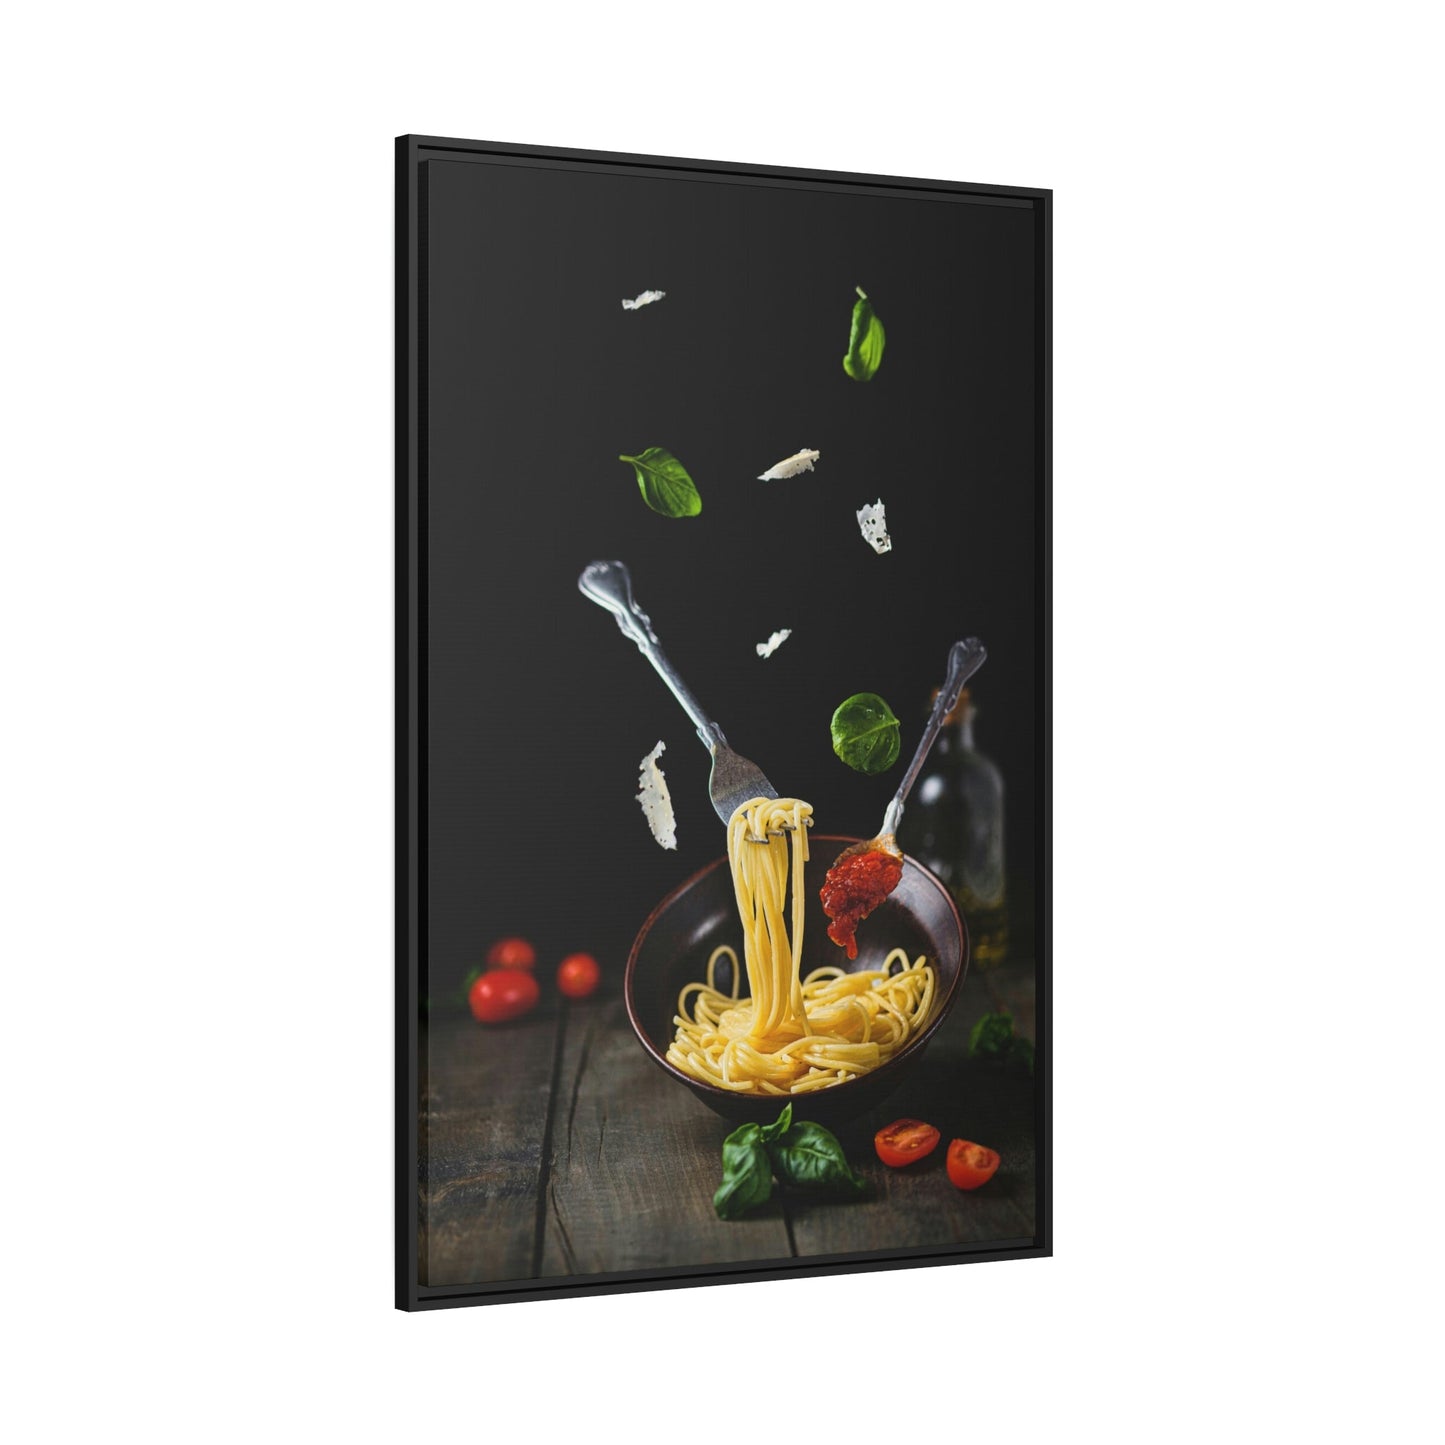 Pasta Passion: Artistic Framed Canvas Prints for Your Kitchen